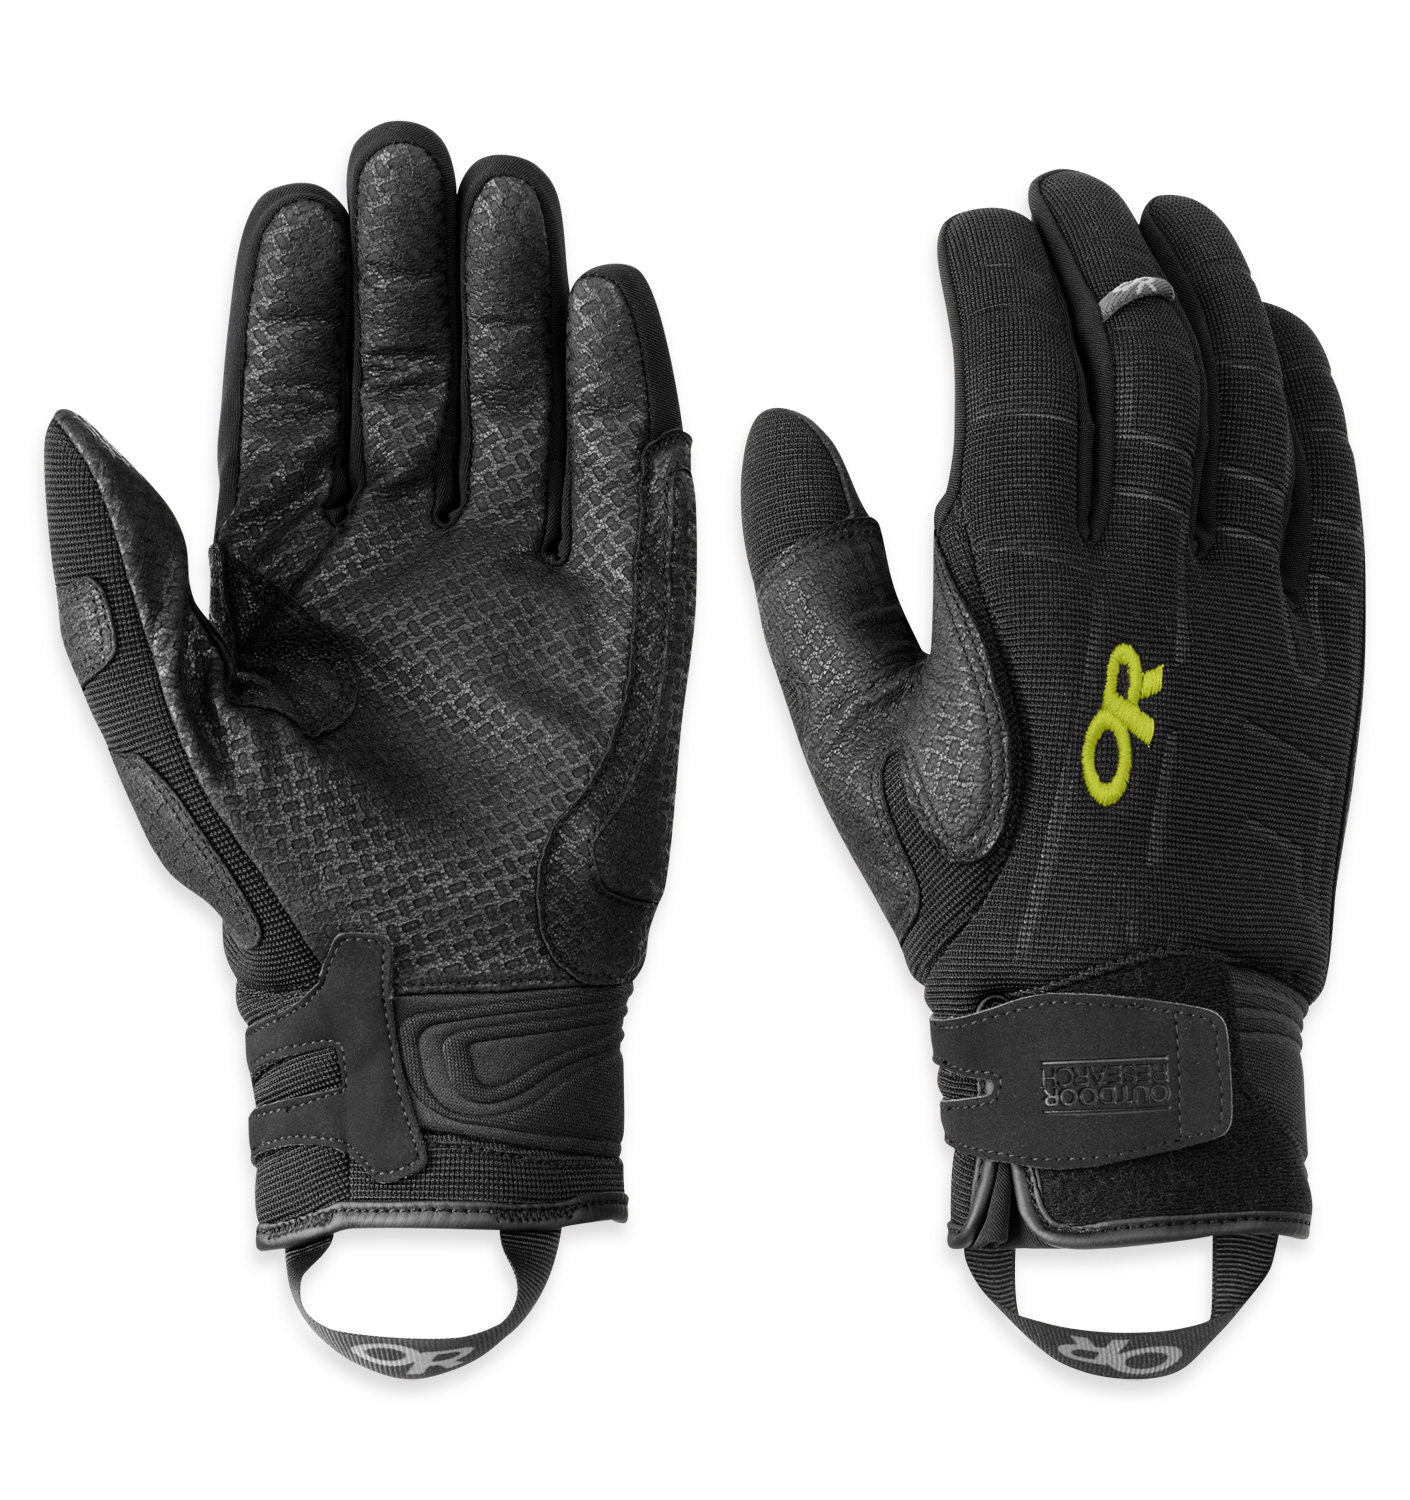 Gear Review: Outdoor Research Alibi II Glove | The ...
